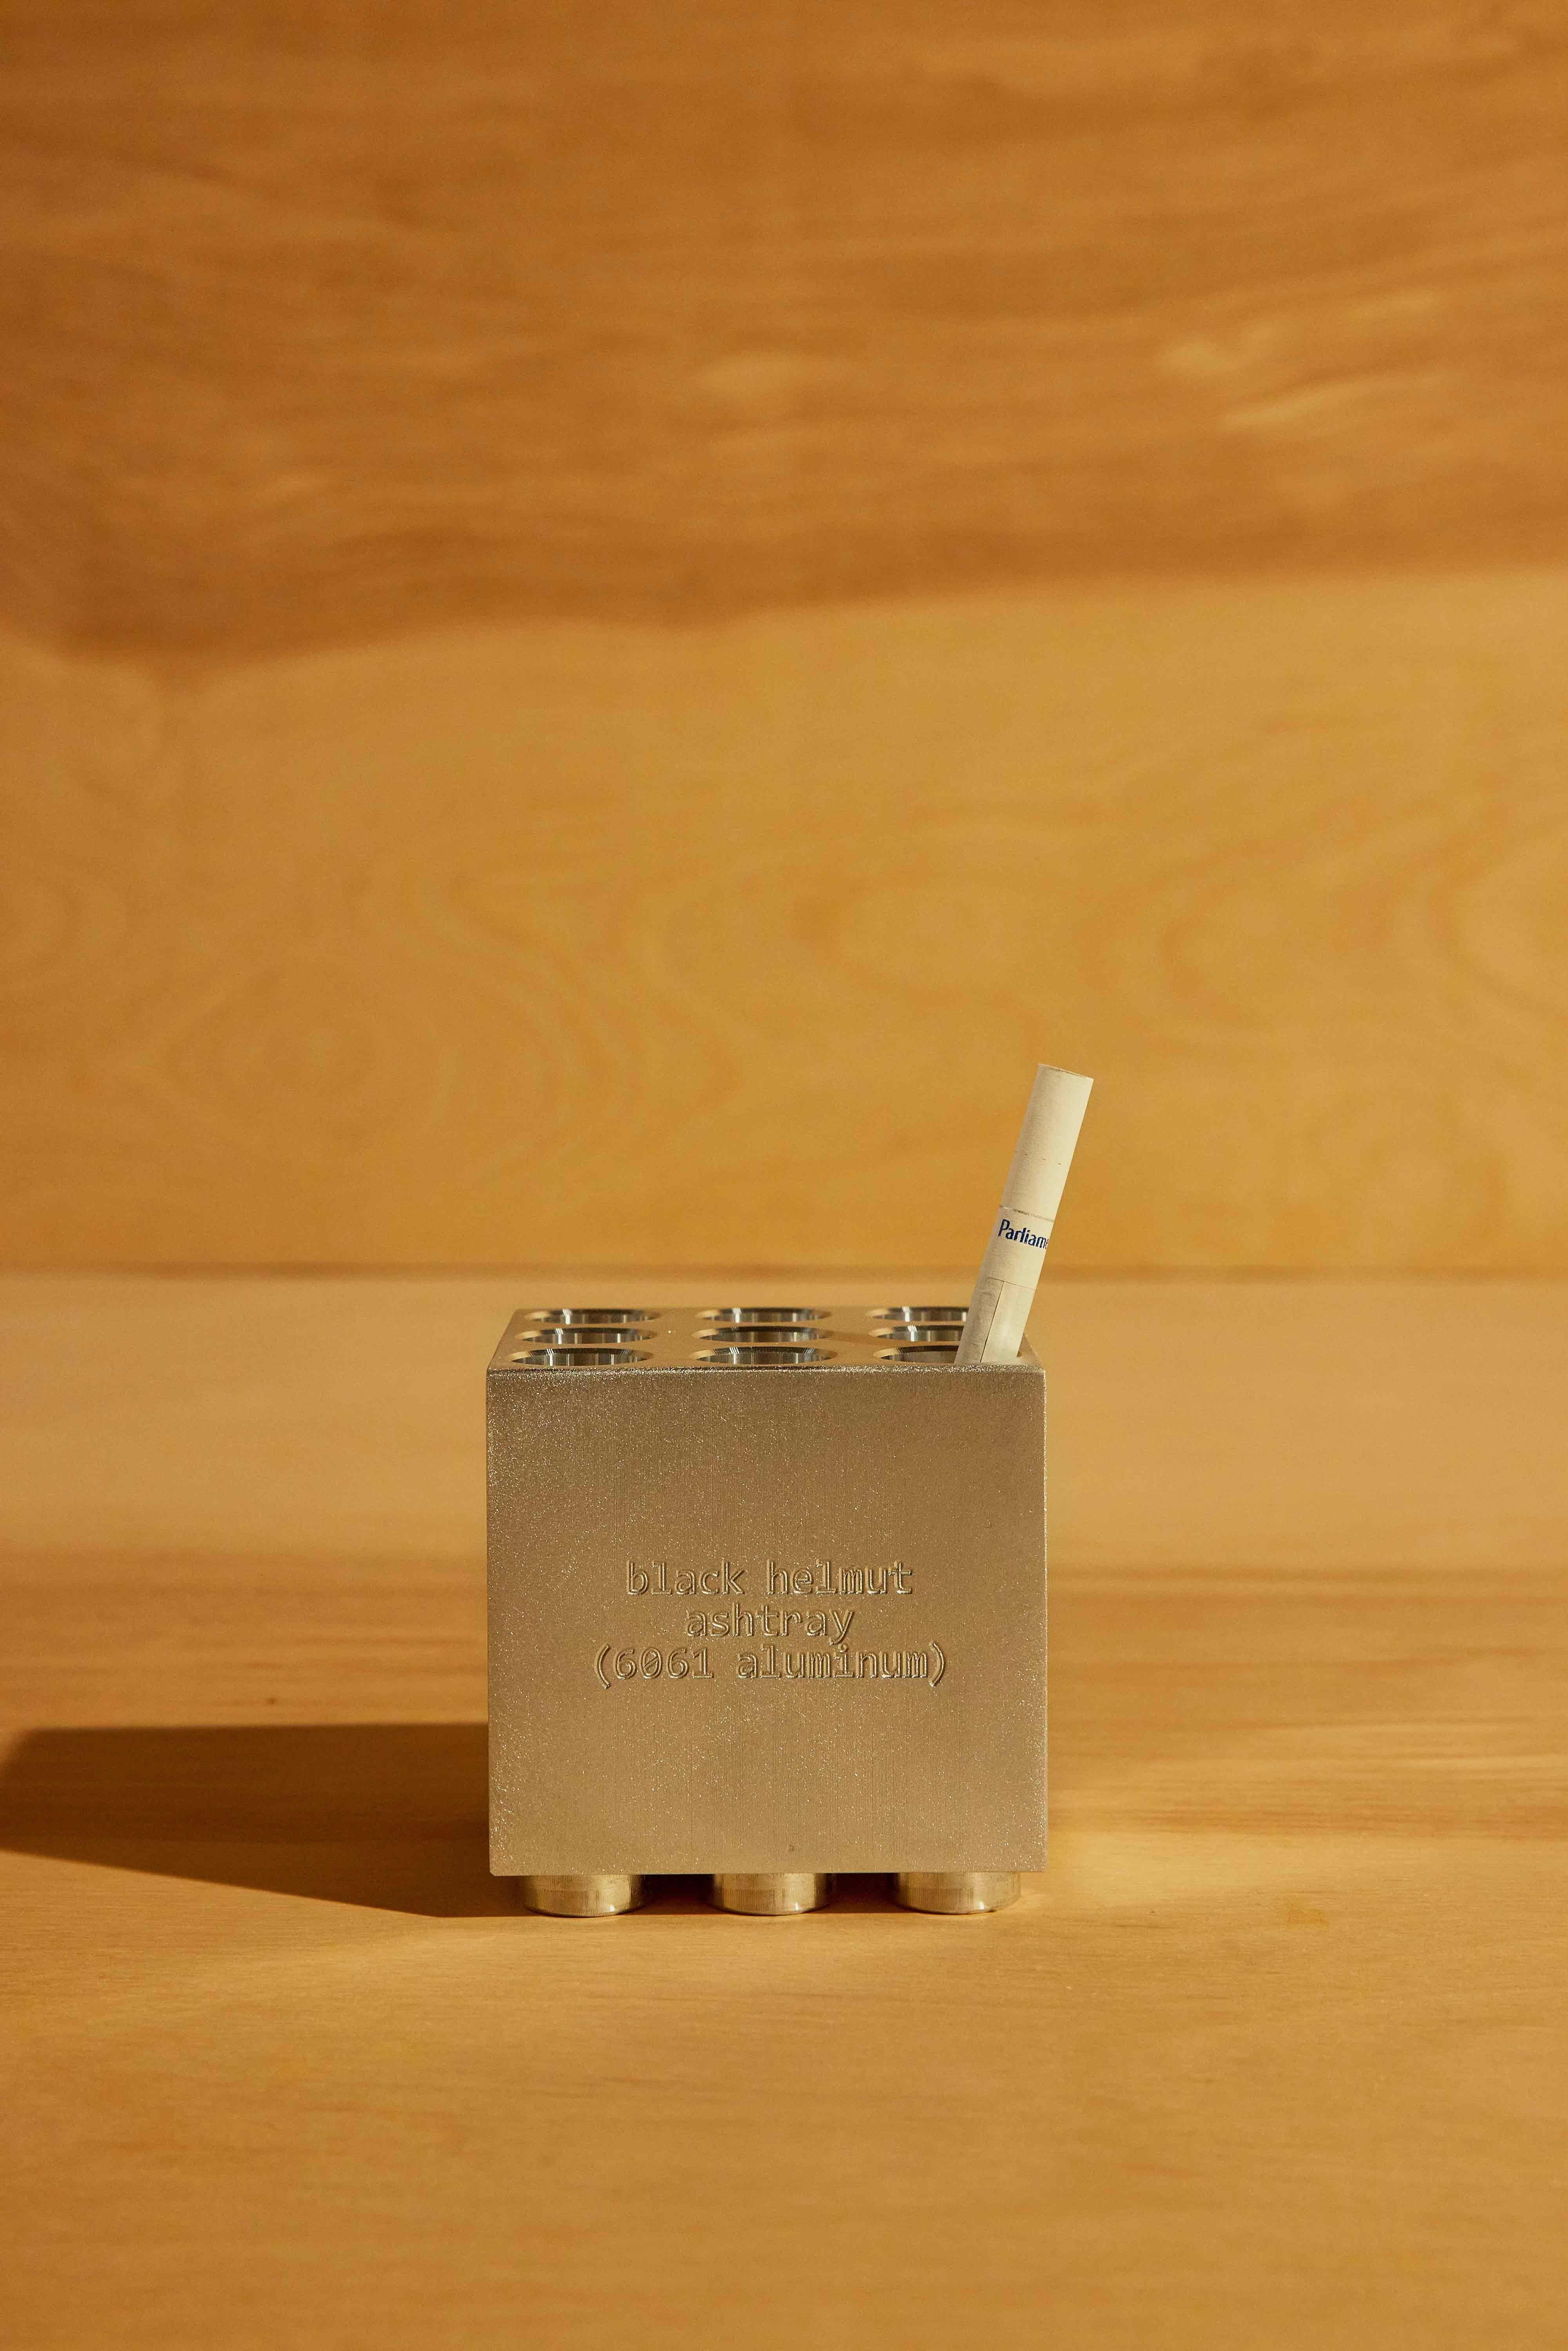 The Ashtray, in Solid 6061 Aluminum; post-modern & brutal. 

Inspired by the iconic functionality of the Lego, the Ashtray has 9 holes at 3 different depths; the perfect accommodation for storing or snuffing out anything you can smoke. Further,